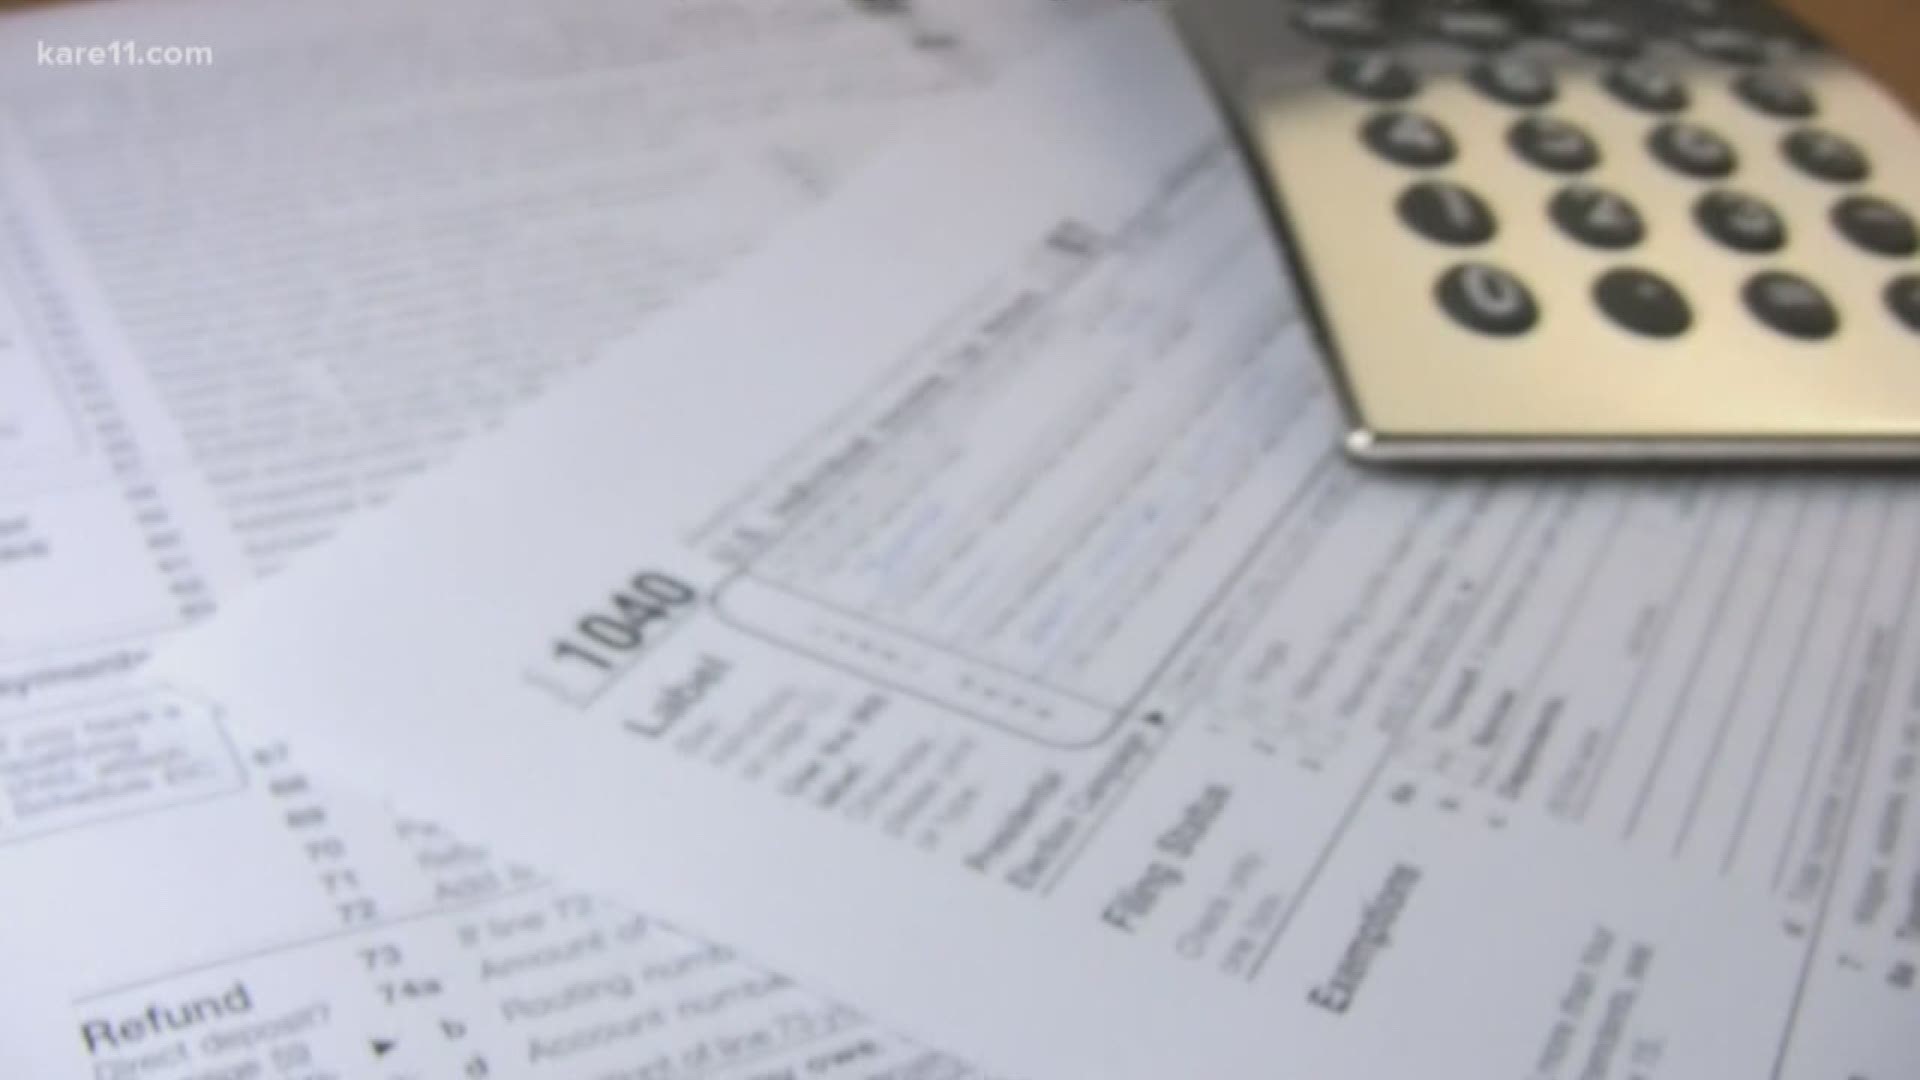 Your tax refund might be lower this year than you expected. The IRS says early numbers show the average refund is down 8 percent this year, compared to last -- that's about $170. KARE 11's Heidi Wigdahl spoke to an expert to find out why.